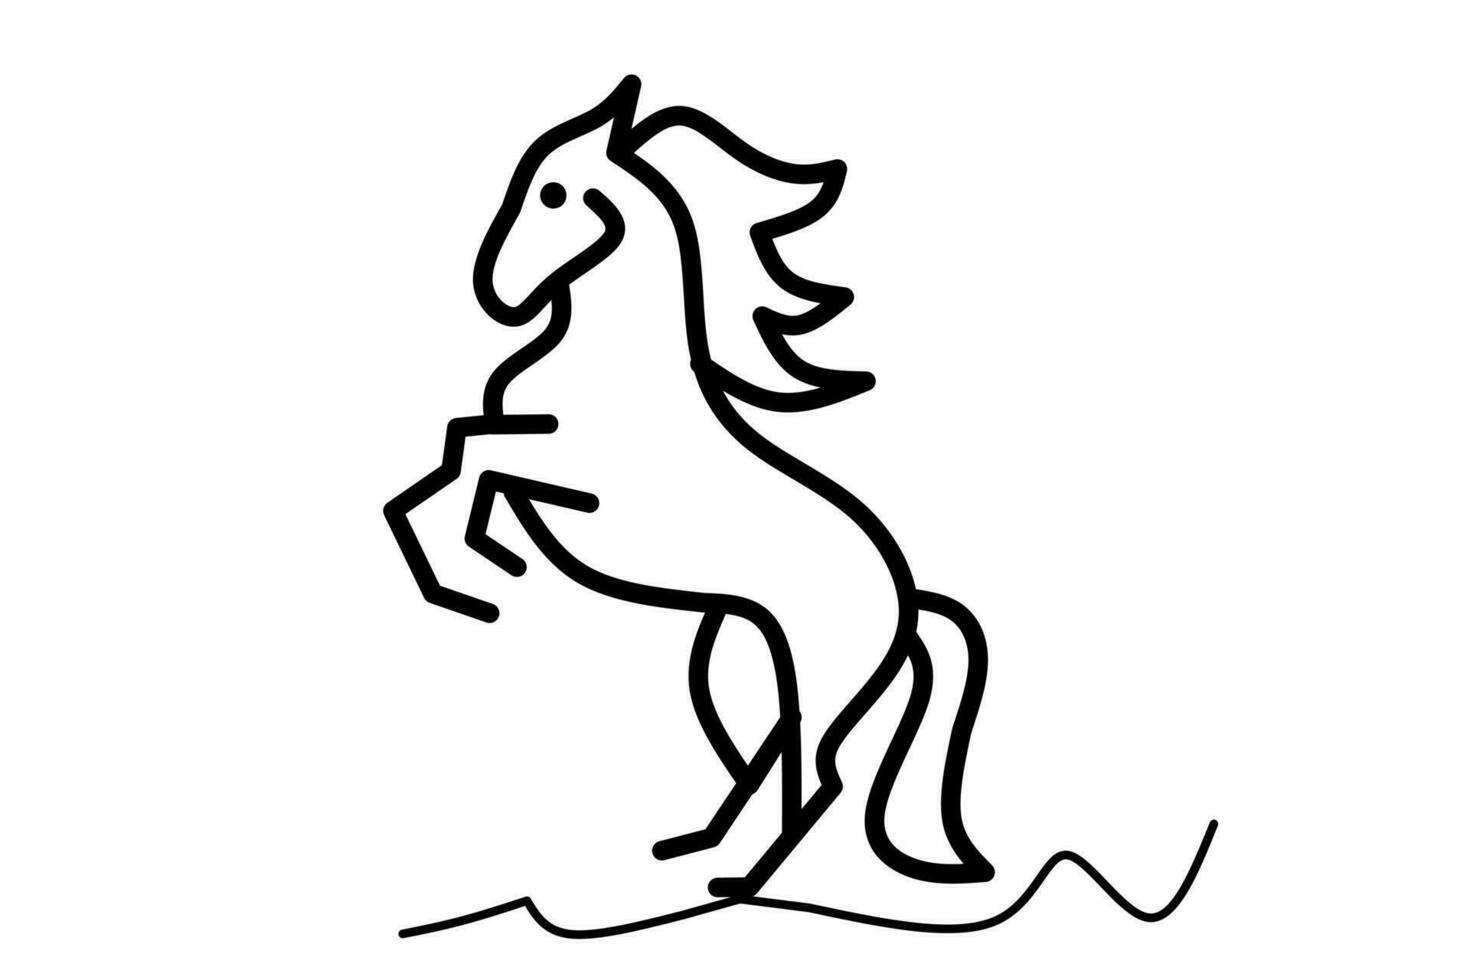 horse line drawing isolated on white background. vector illustration.